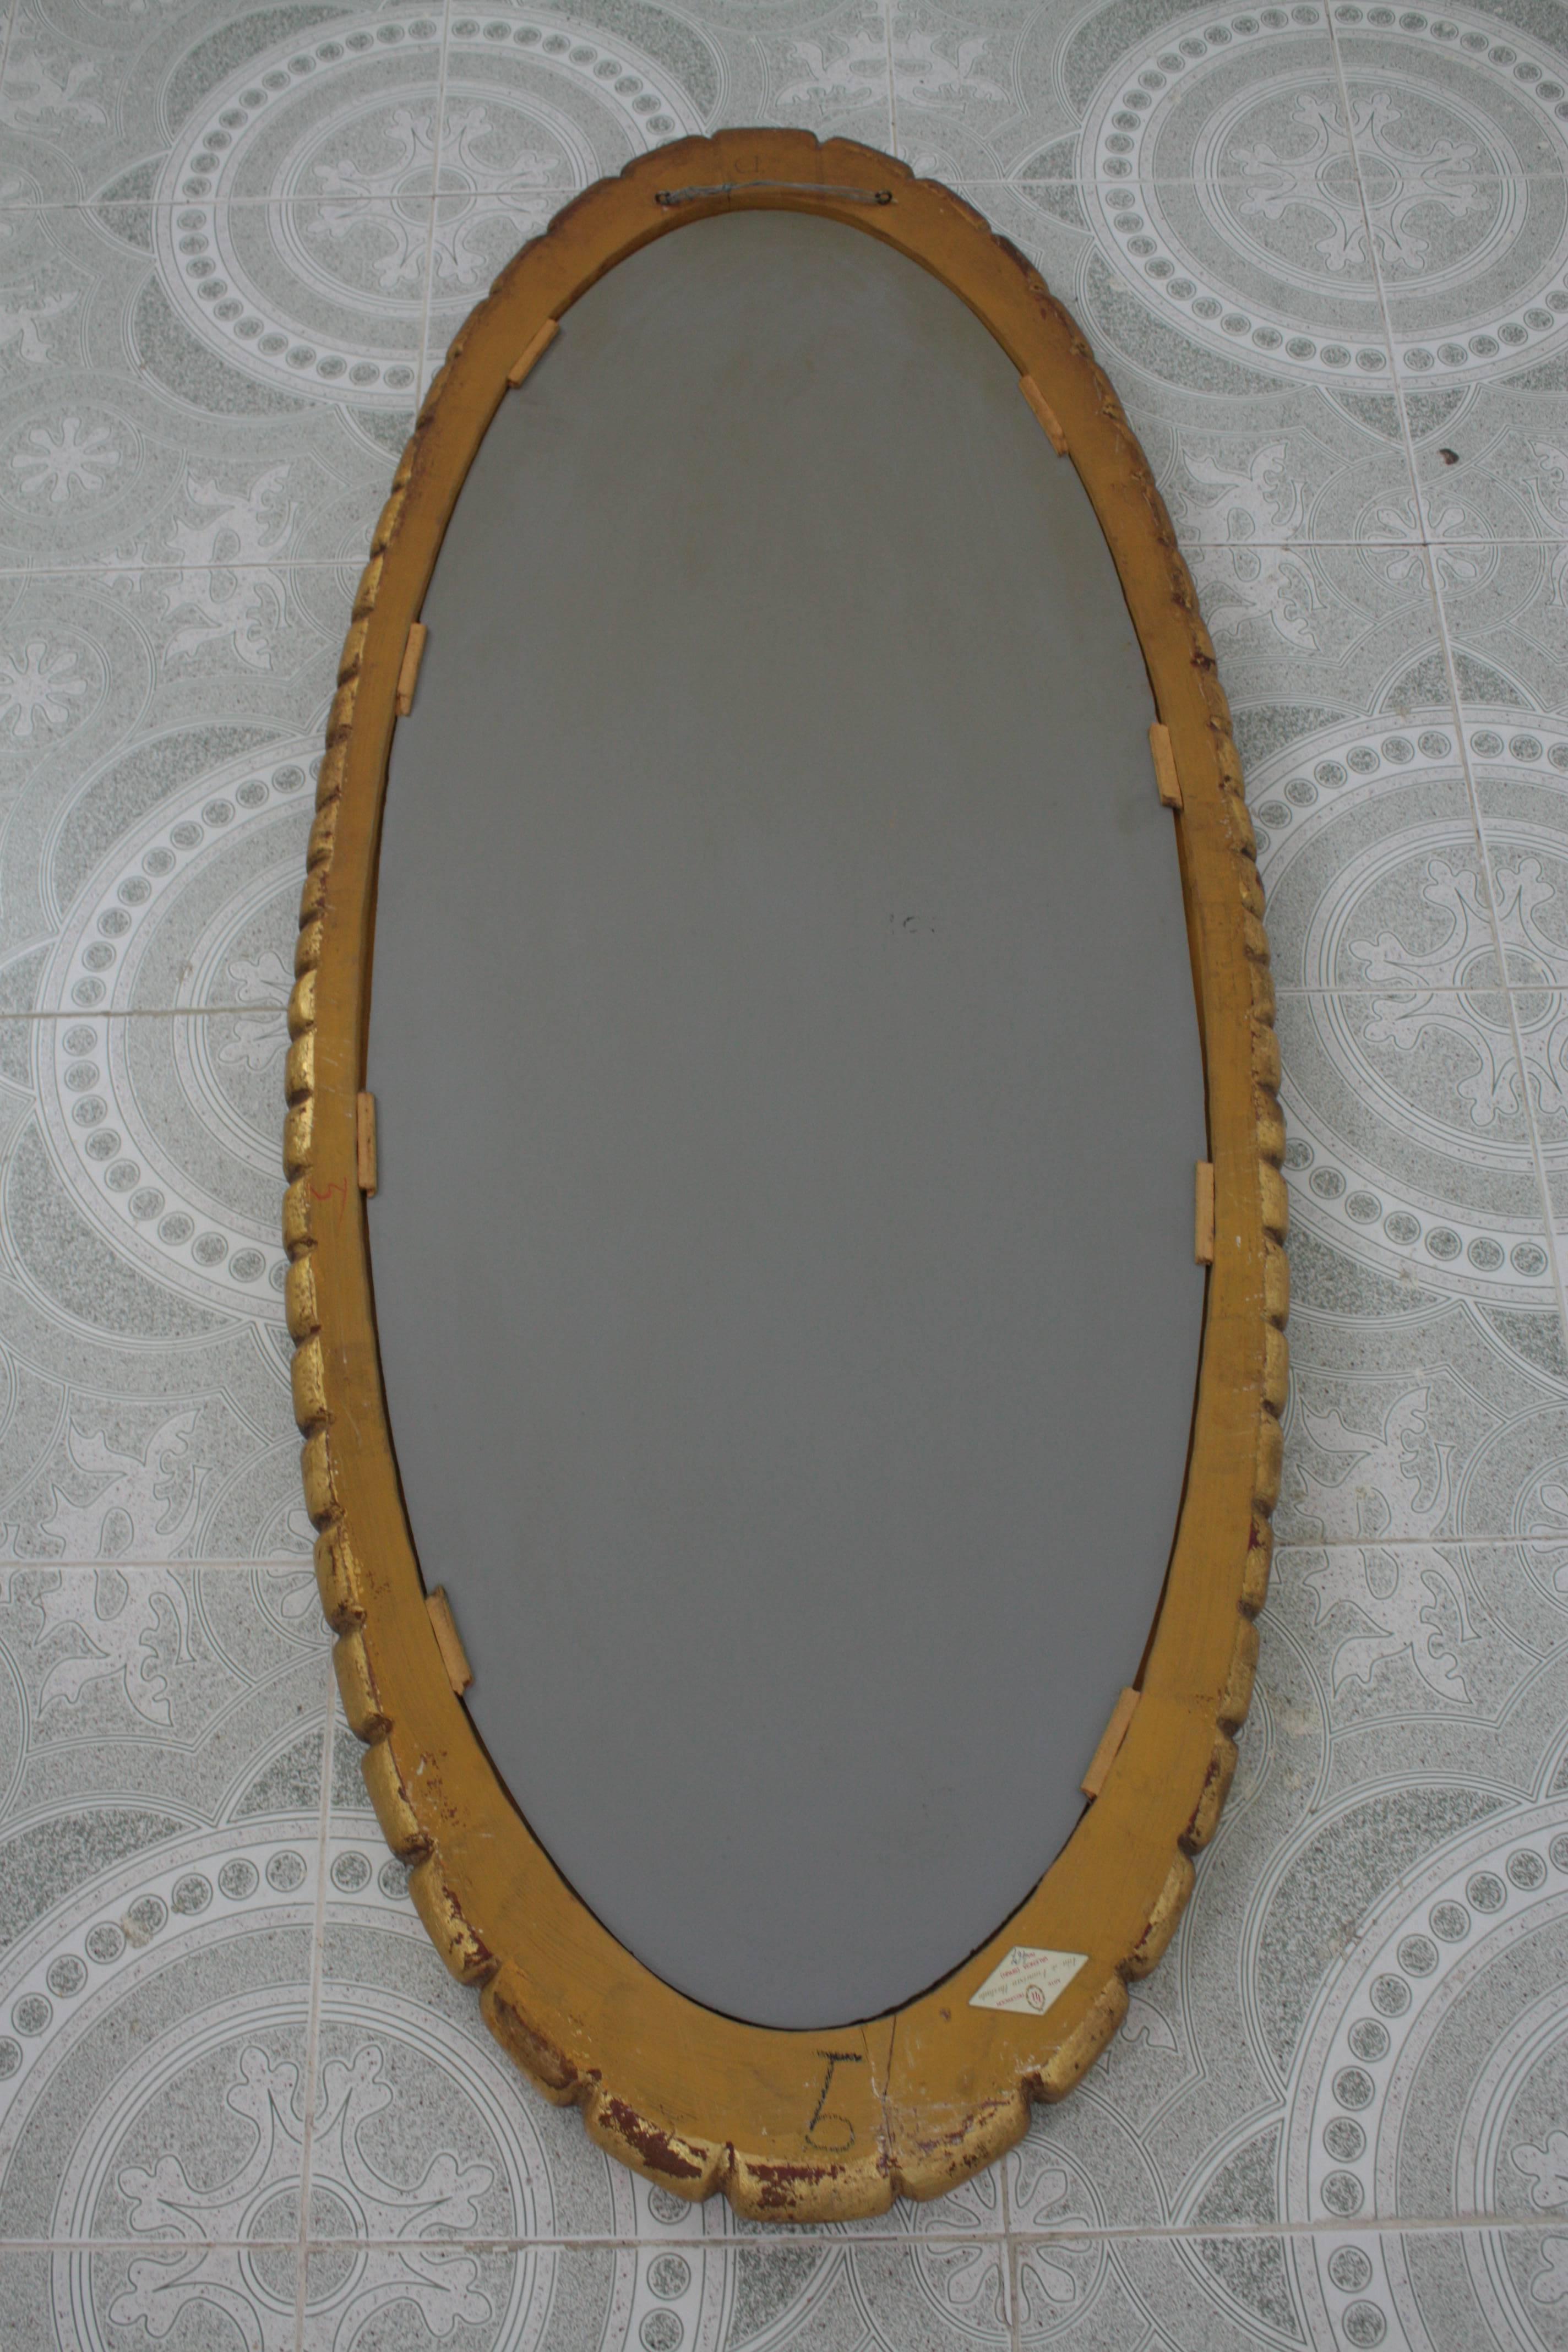 Hollywood Regency Francisco Hurtado Carved and Giltwood Oval Mirror, Spain 1